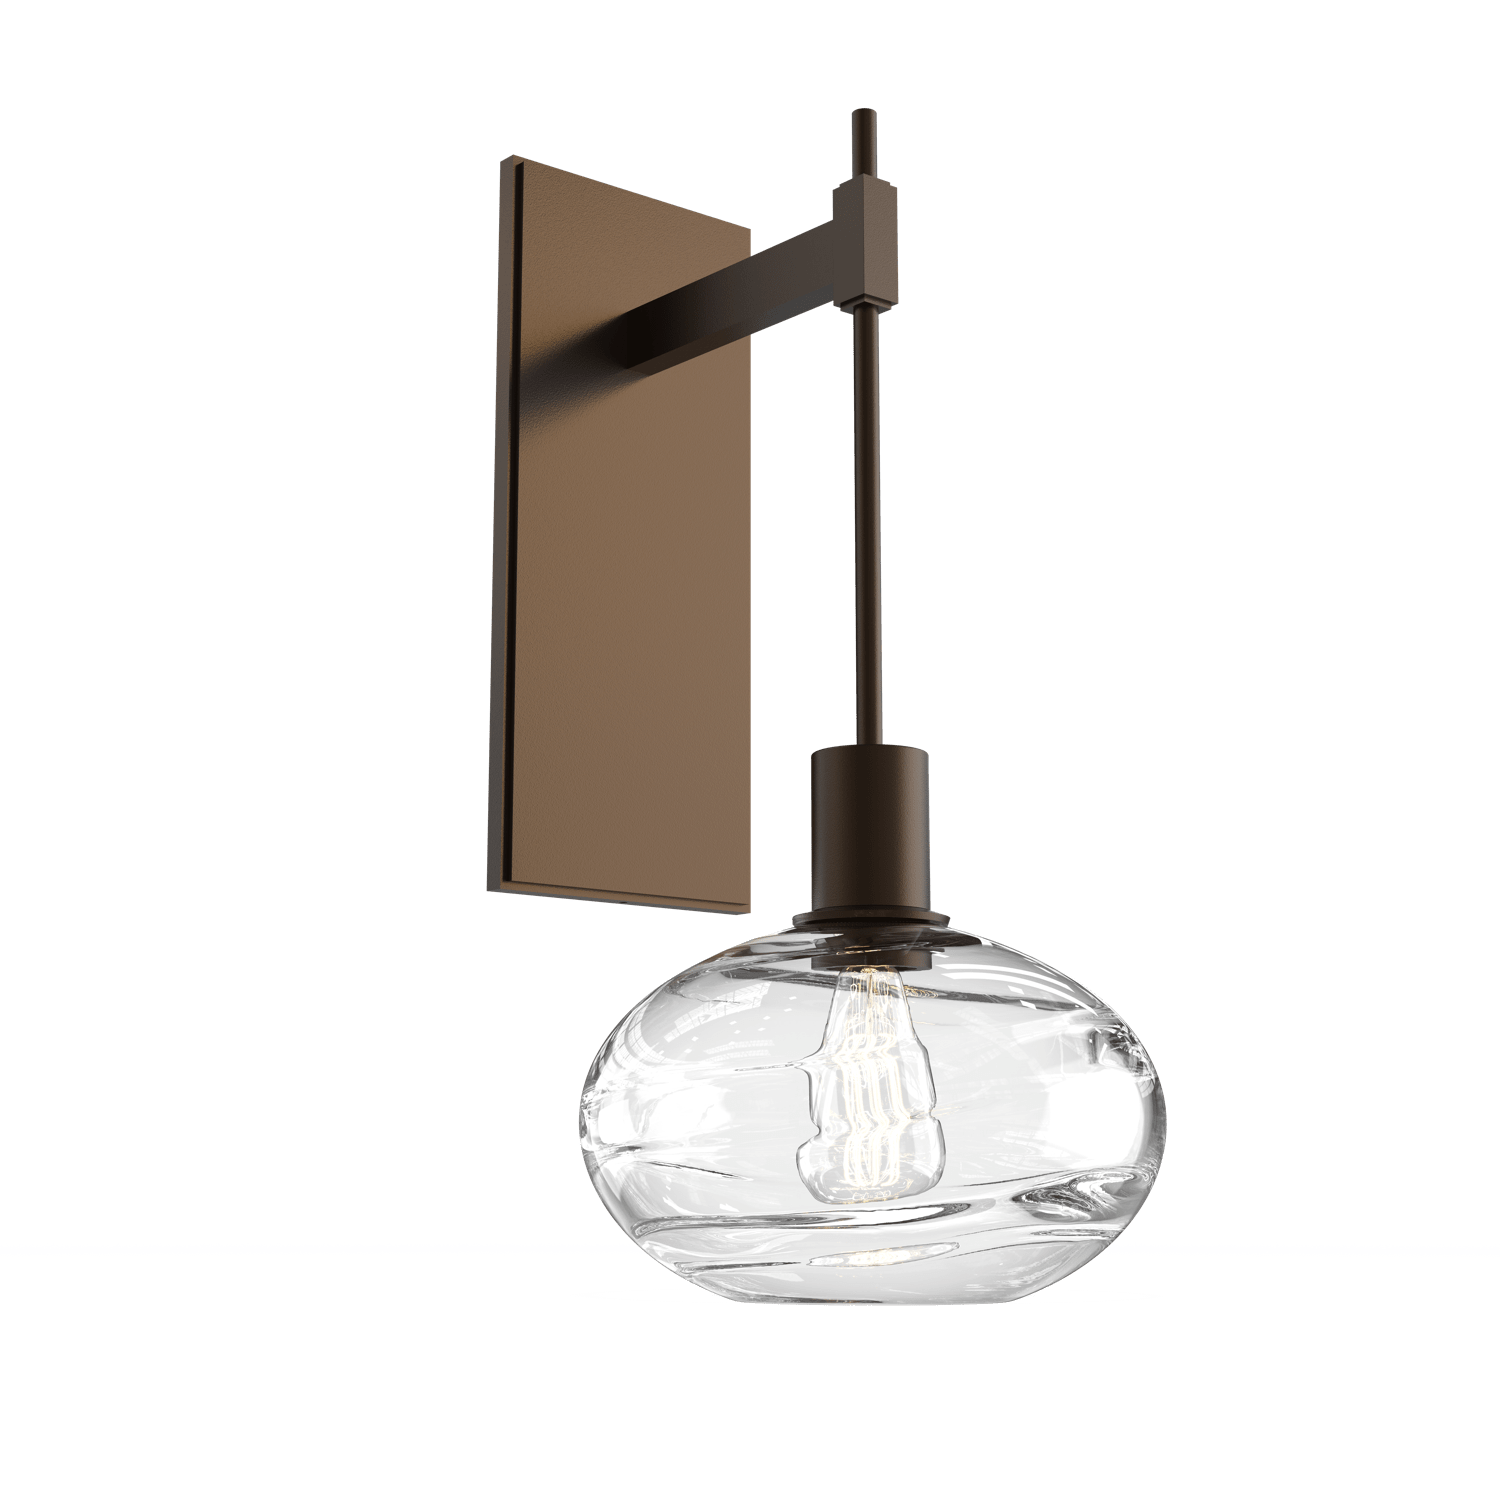 IDB0036-18-FB-OC-Hammerton-Studio-Optic-Blown-Glass-Coppa-tempo-wall-sconce-with-flat-bronze-finish-and-optic-clear-blown-glass-shades-and-incandescent-lamping